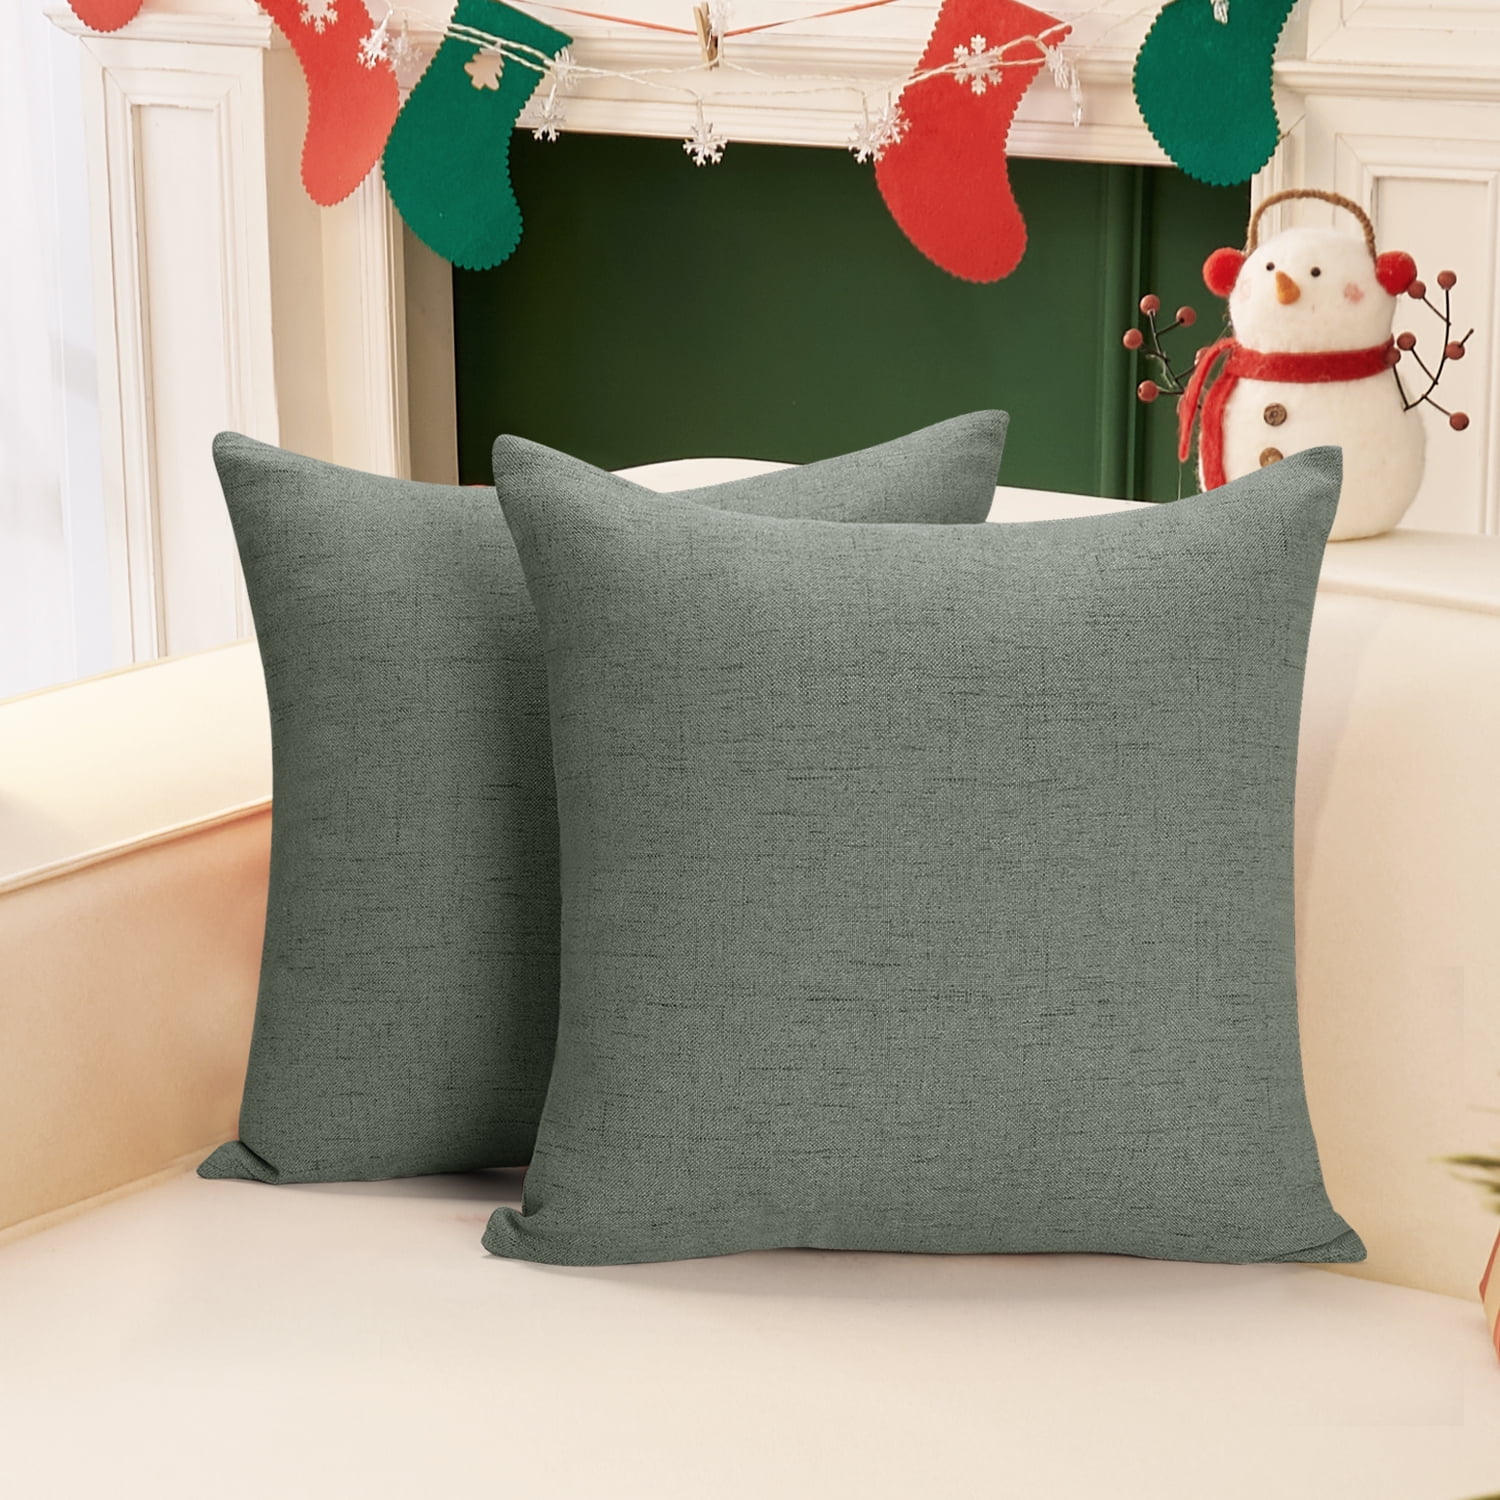 Deconovo Christmas Decorative Pillows Pack of 4 Throw Pillow Covers  Farmhouse Burlap Cushion Cases for Couch Sofa Bedroom 16 x 16 inch Grayish  Green